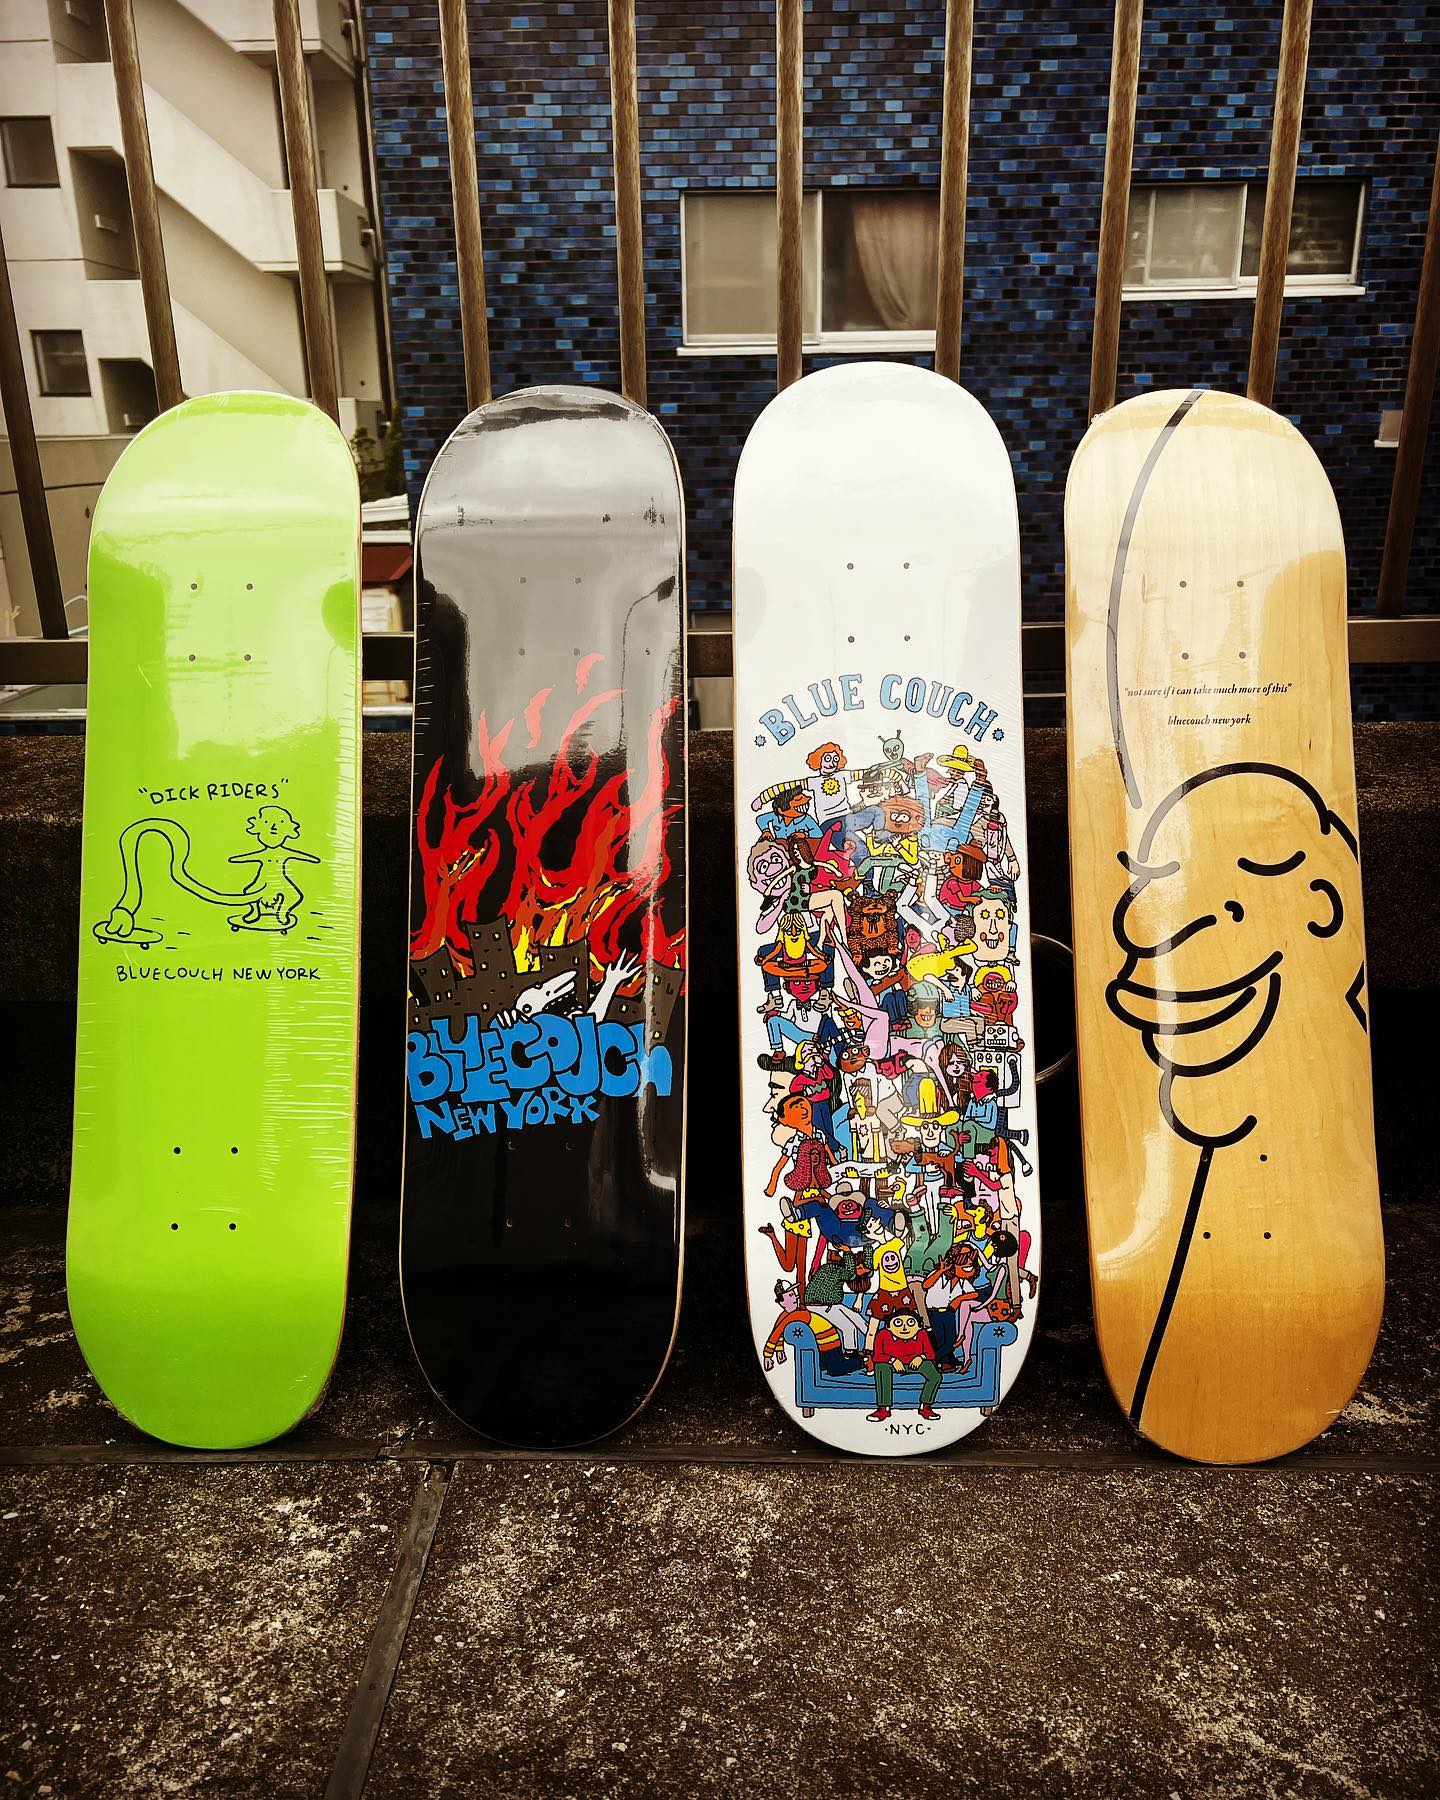 New @bluecouch_ny Boards.NYCのデッキカンパニーBlue Couchから新作デッキが到着！